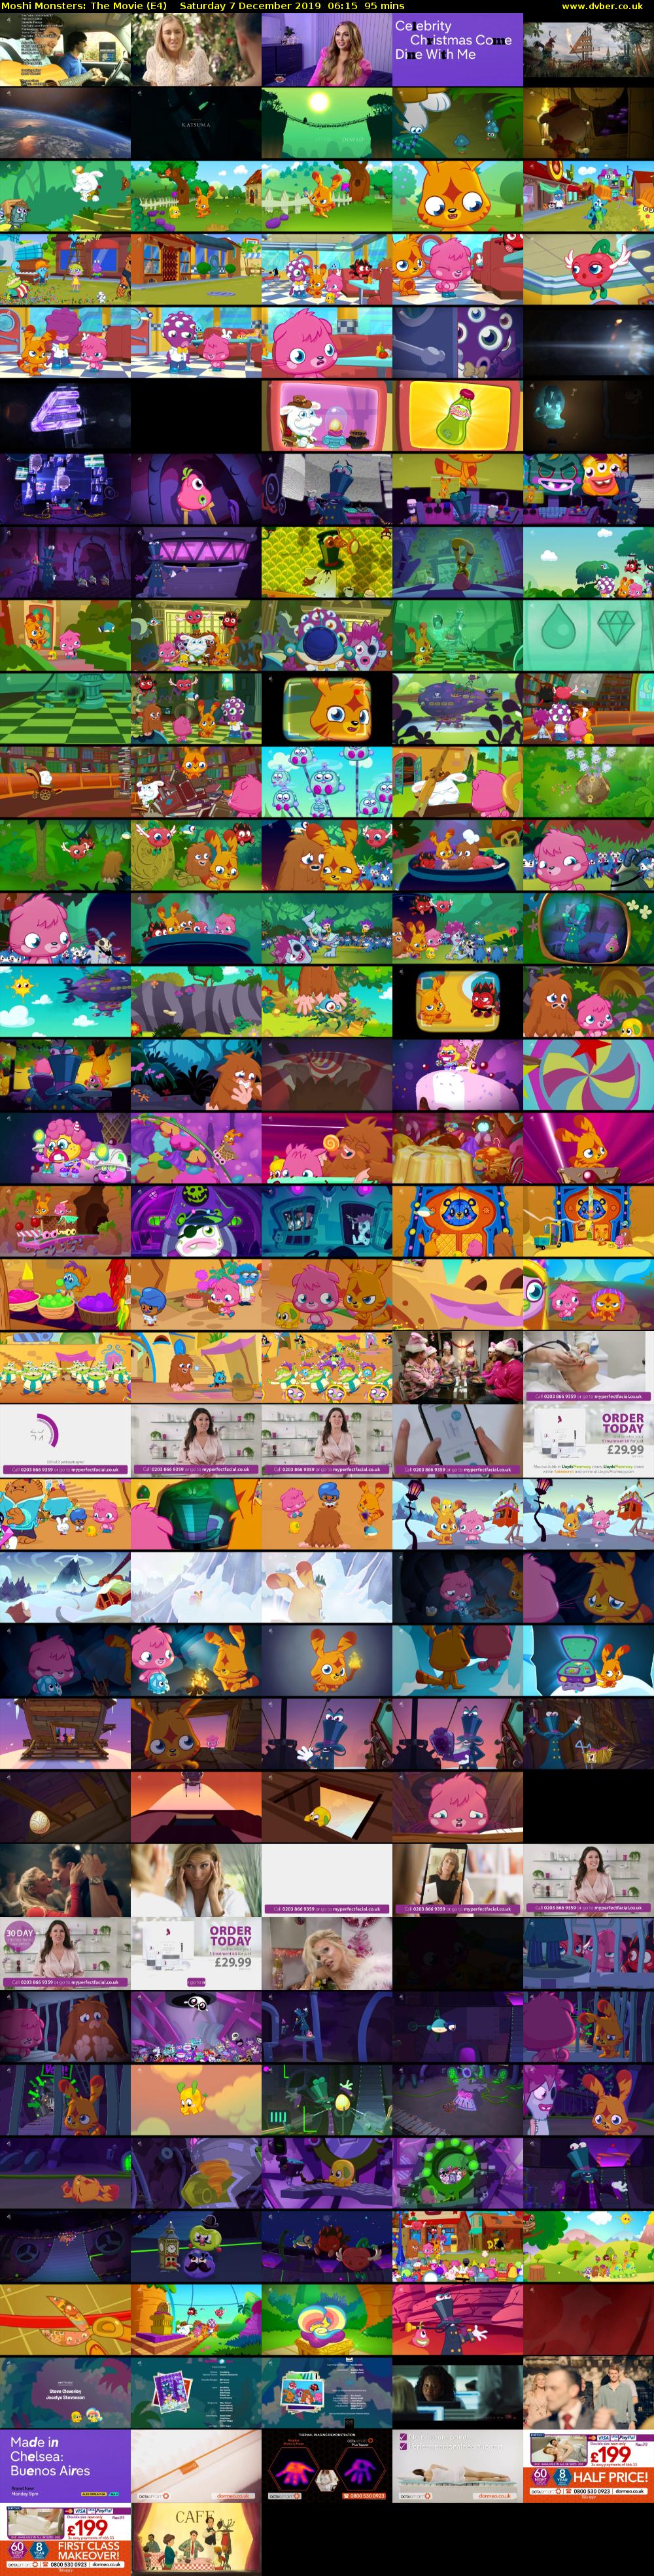 Moshi Monsters: The Movie (E4) Saturday 7 December 2019 06:15 - 07:50